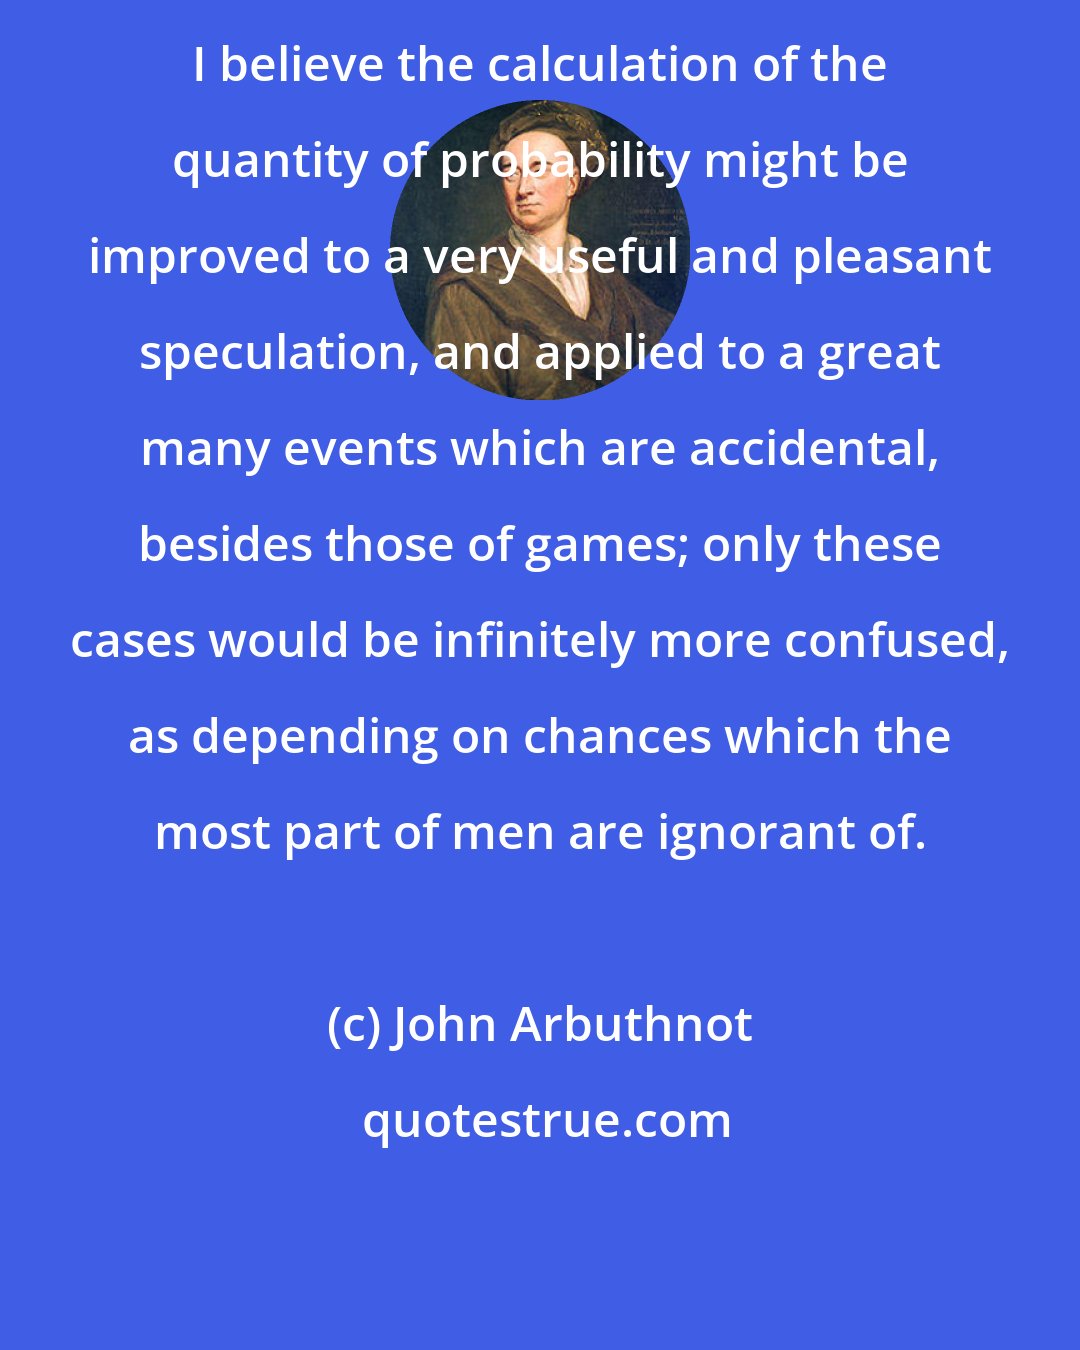 John Arbuthnot: I believe the calculation of the quantity of probability might be improved to a very useful and pleasant speculation, and applied to a great many events which are accidental, besides those of games; only these cases would be infinitely more confused, as depending on chances which the most part of men are ignorant of.